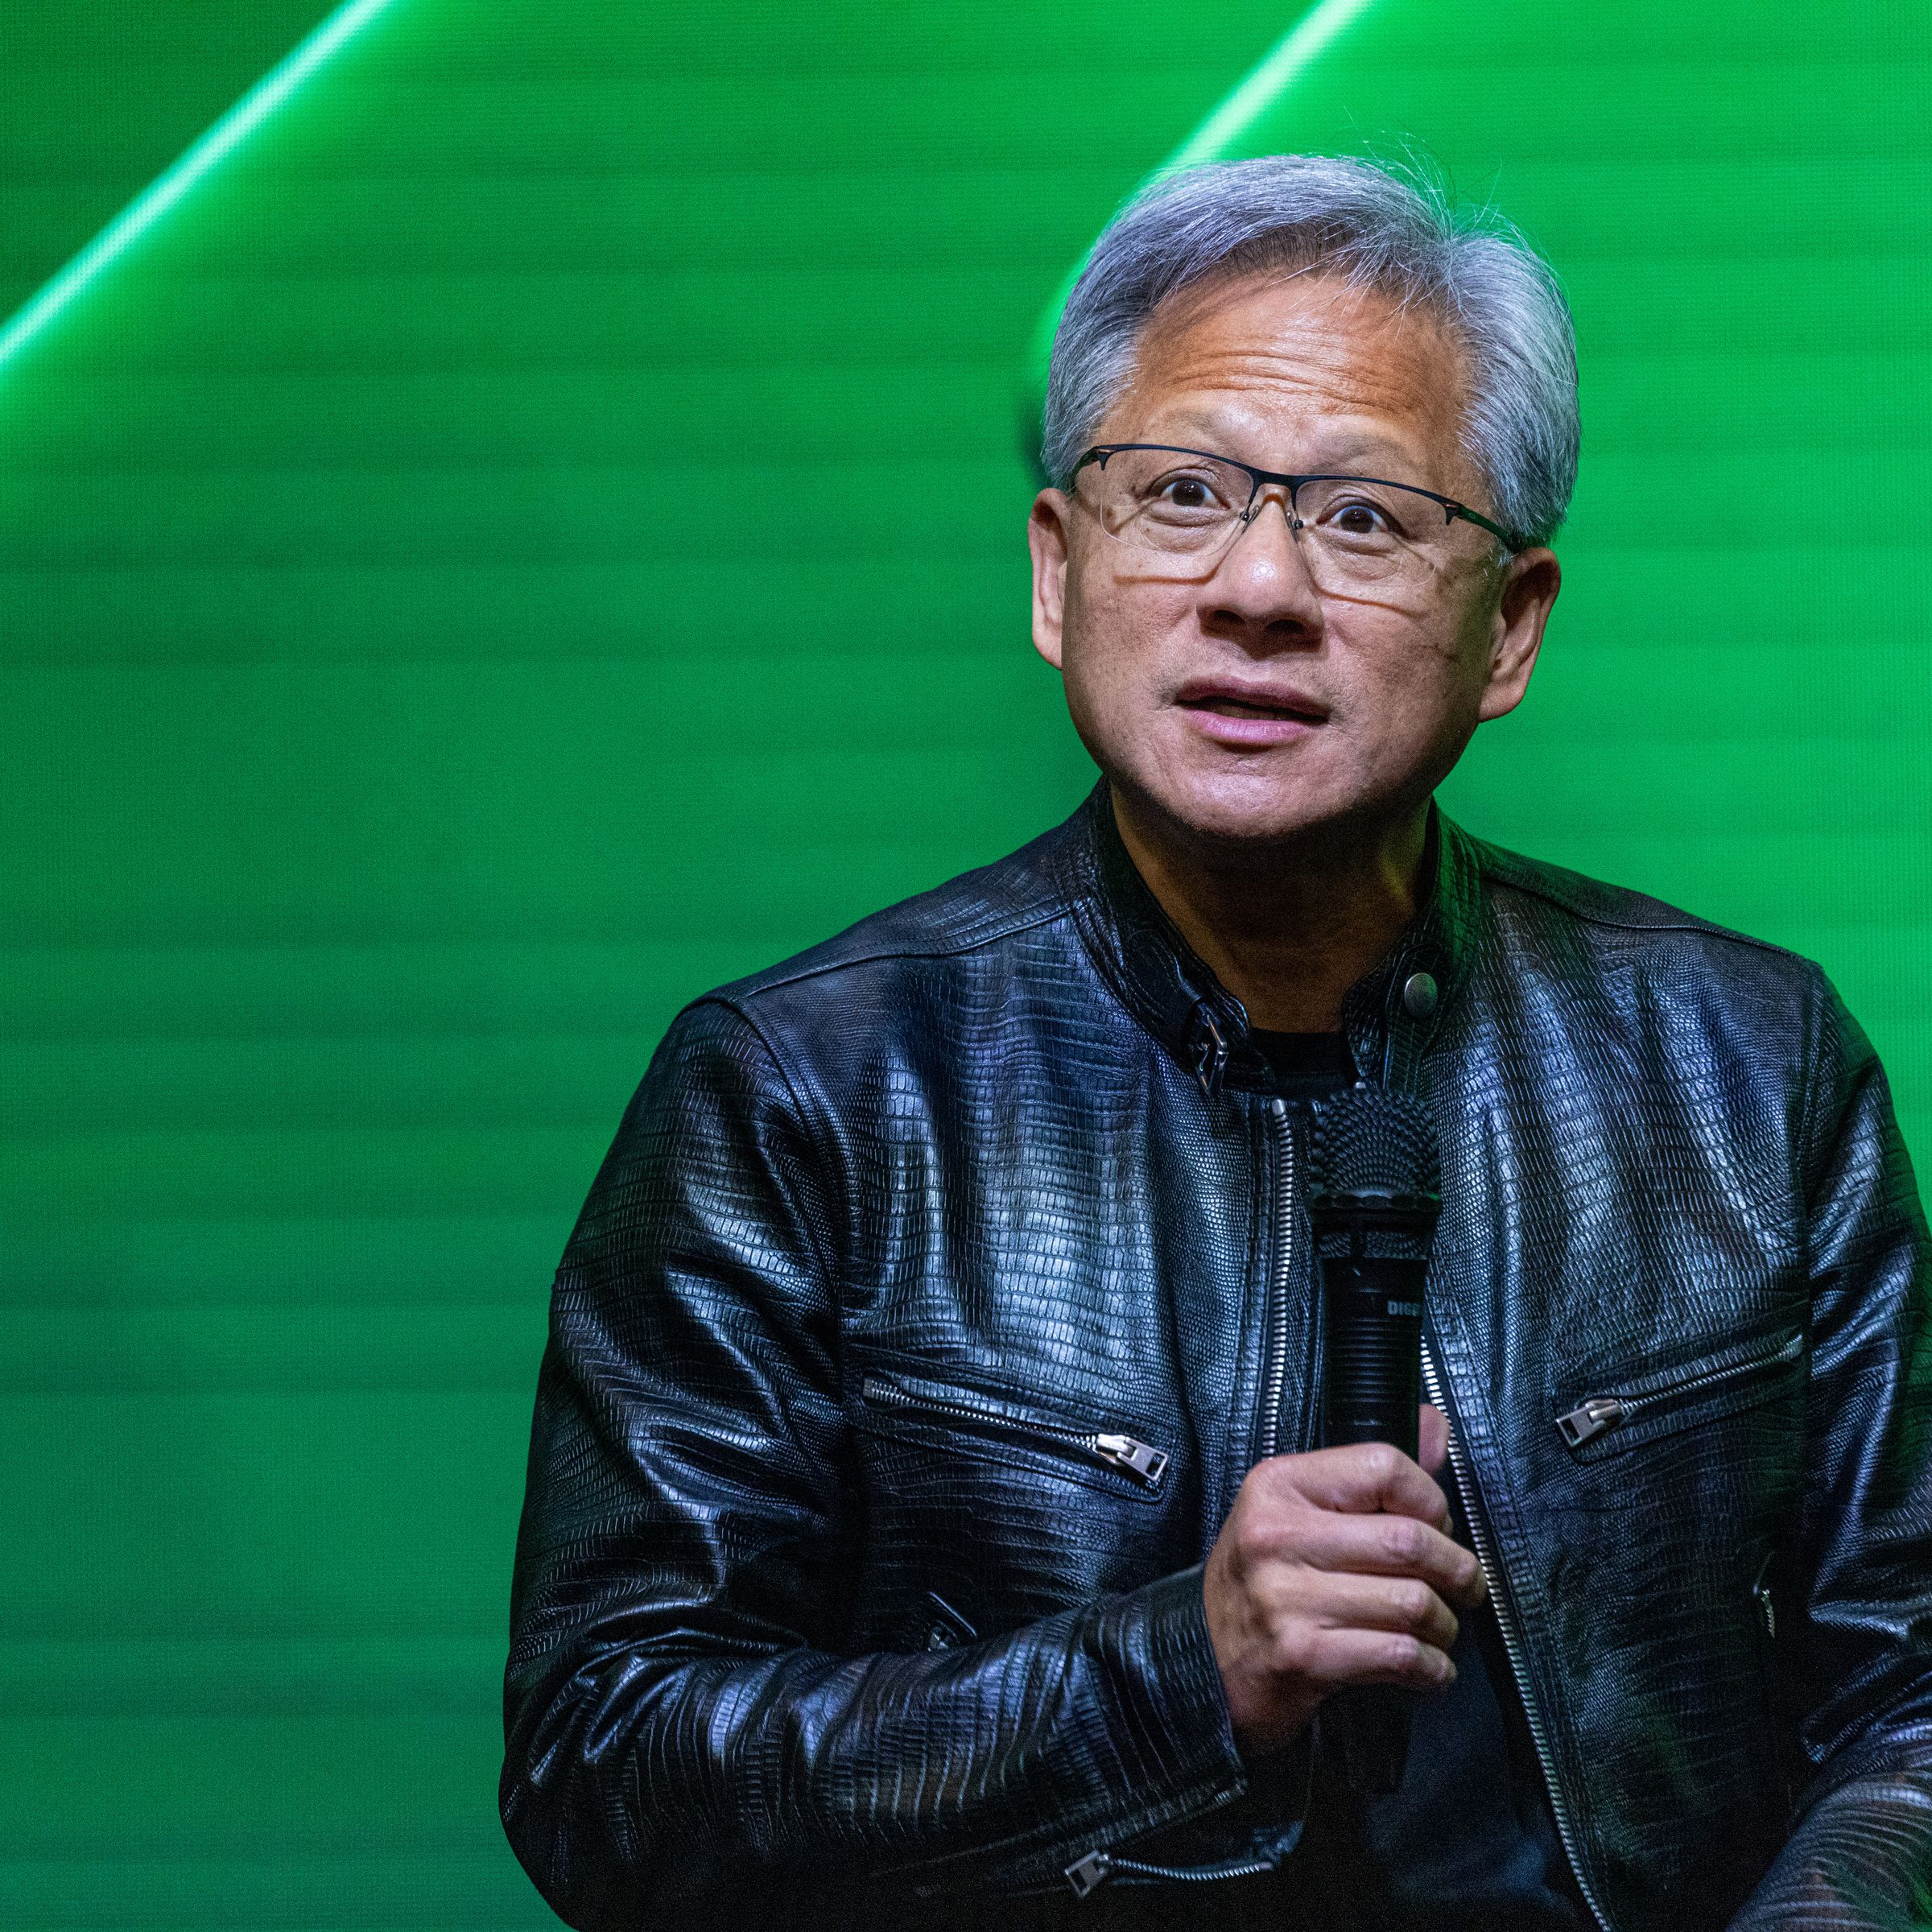 Nvidia CEO Jensen Huang News Conference